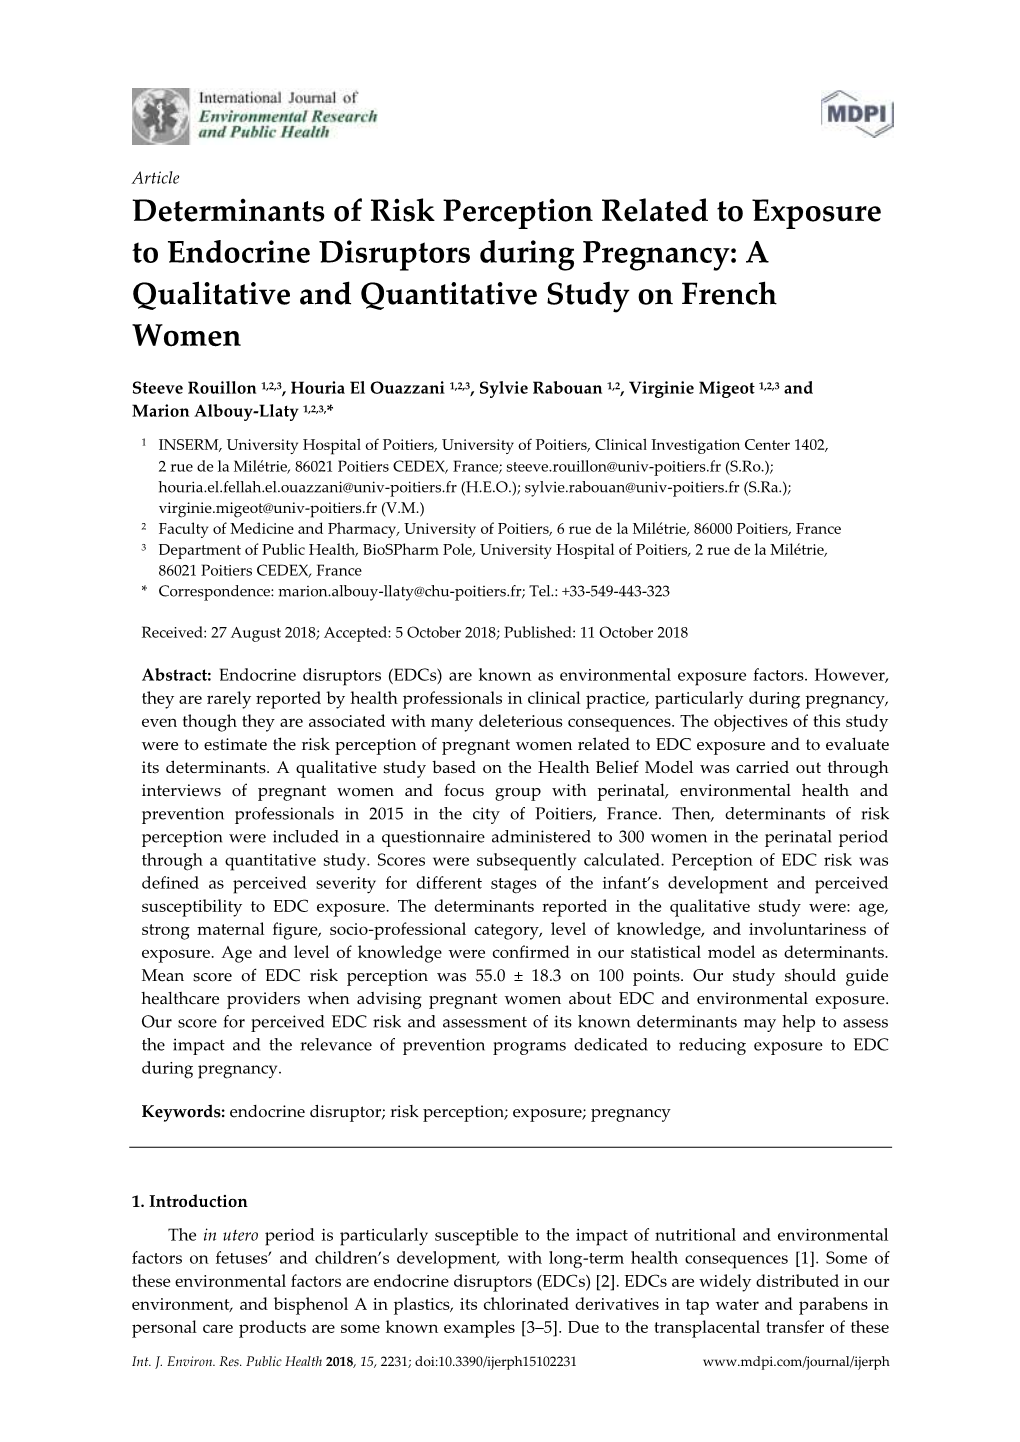 Determinants of Risk Perception Related to Exposure to Endocrine Disruptors During Pregnancy: a Qualitative and Quantitative Study on French Women